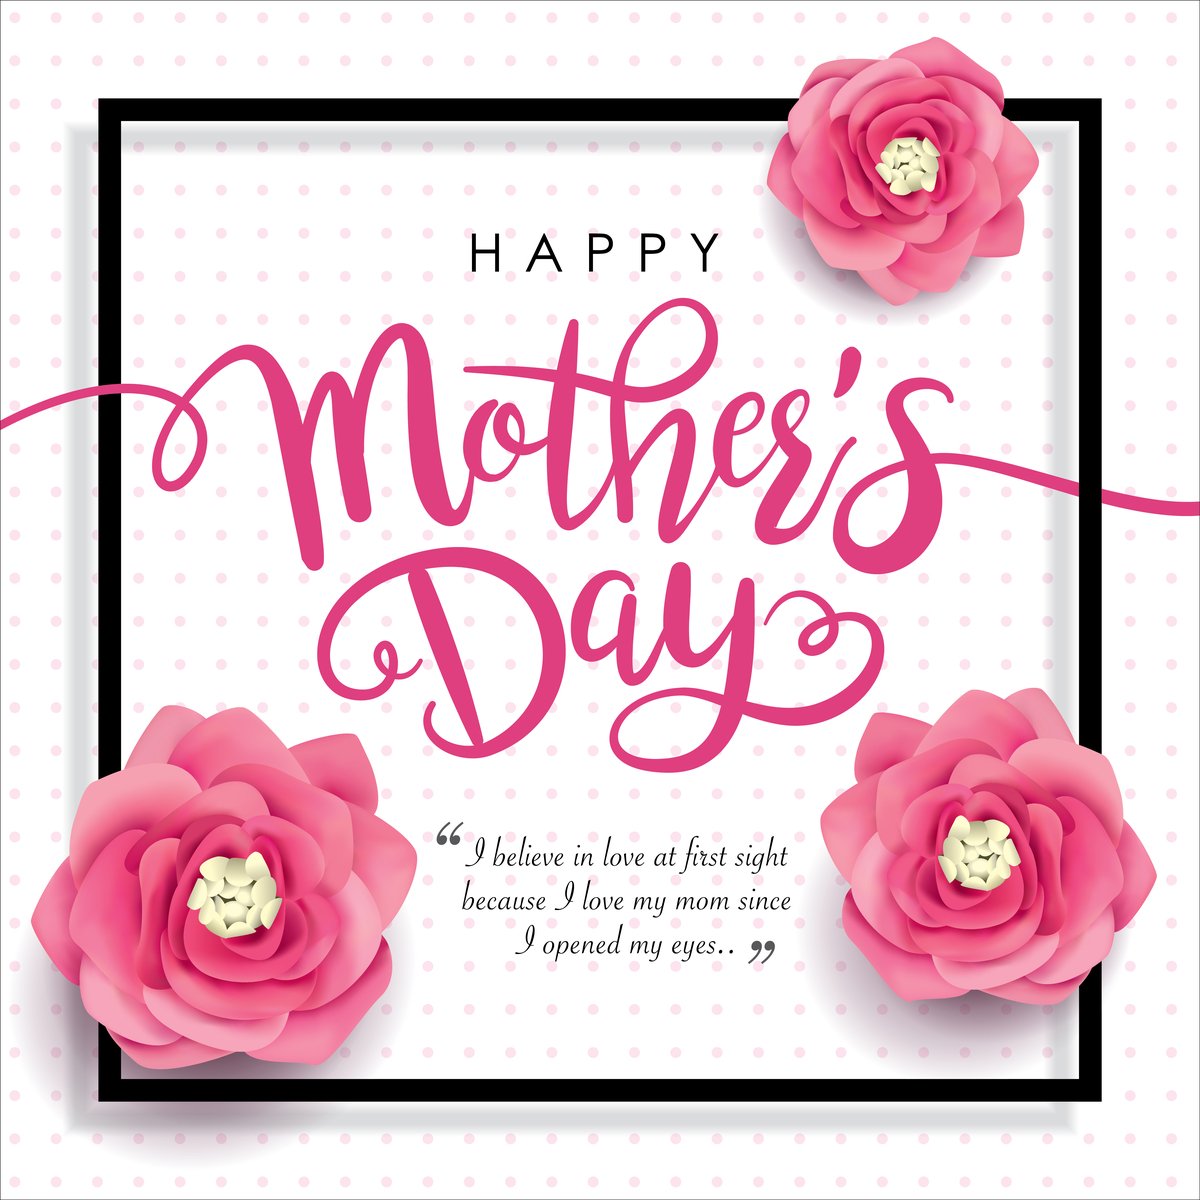 Infofit On Twitter Happy Mother S Day To All Of Our Friends And